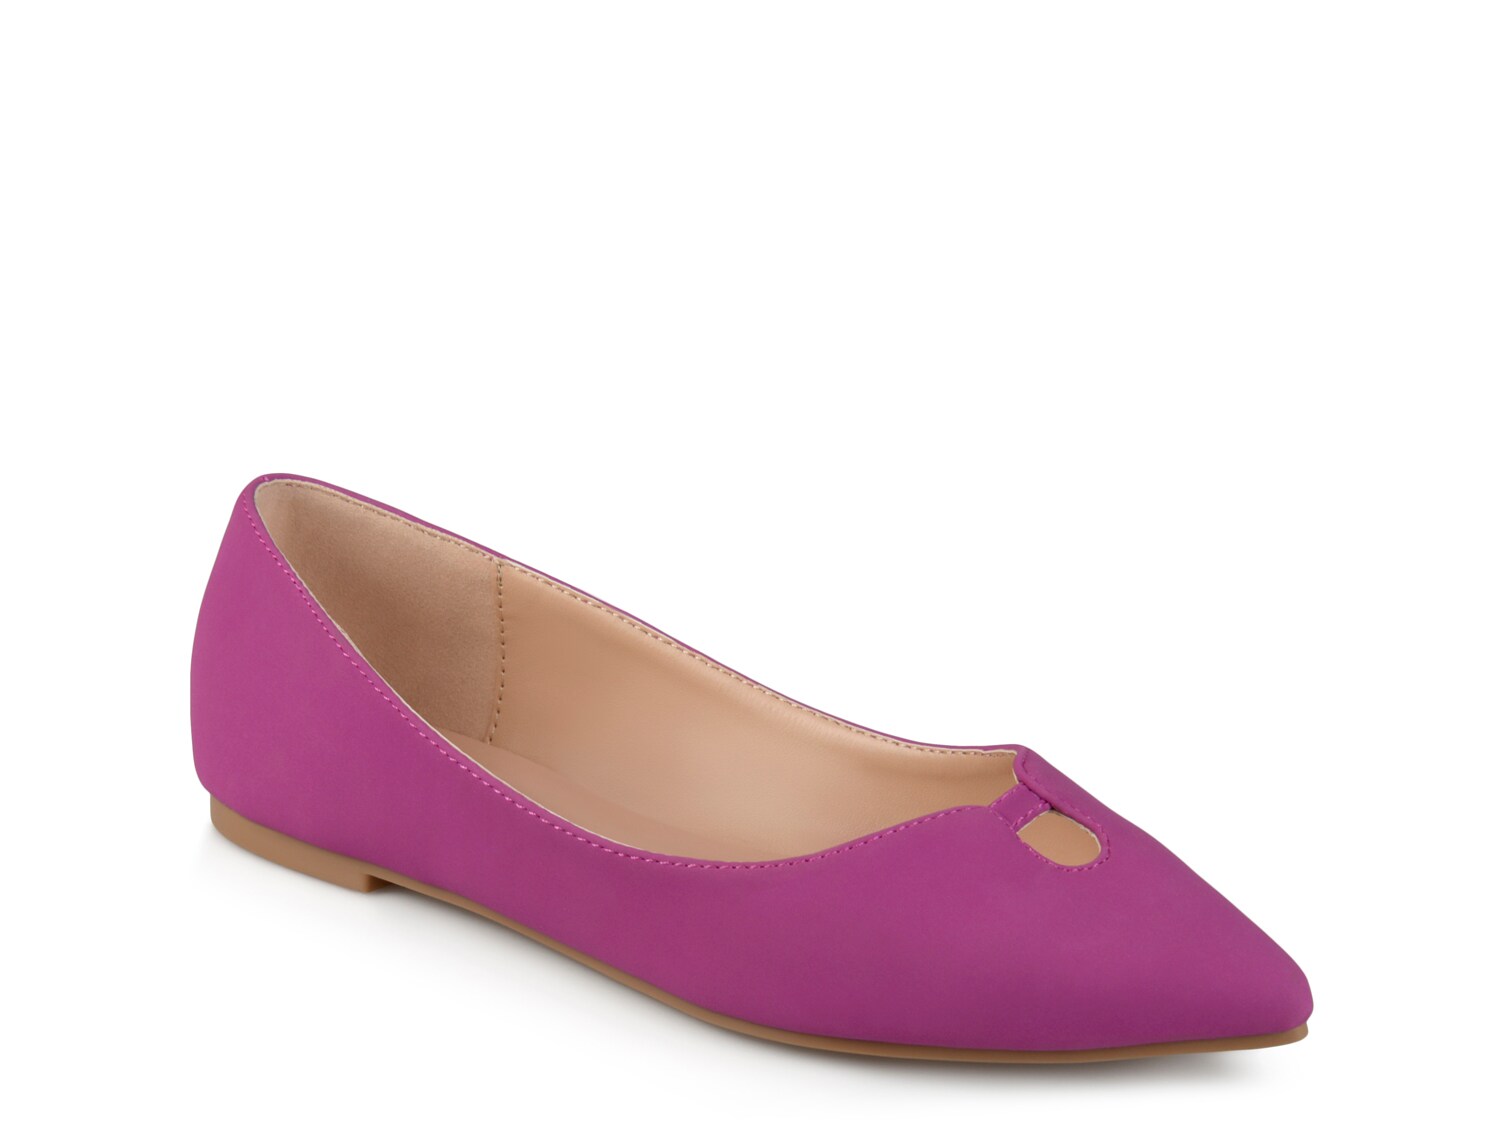 Journee Collection Hildy Flat | DSW